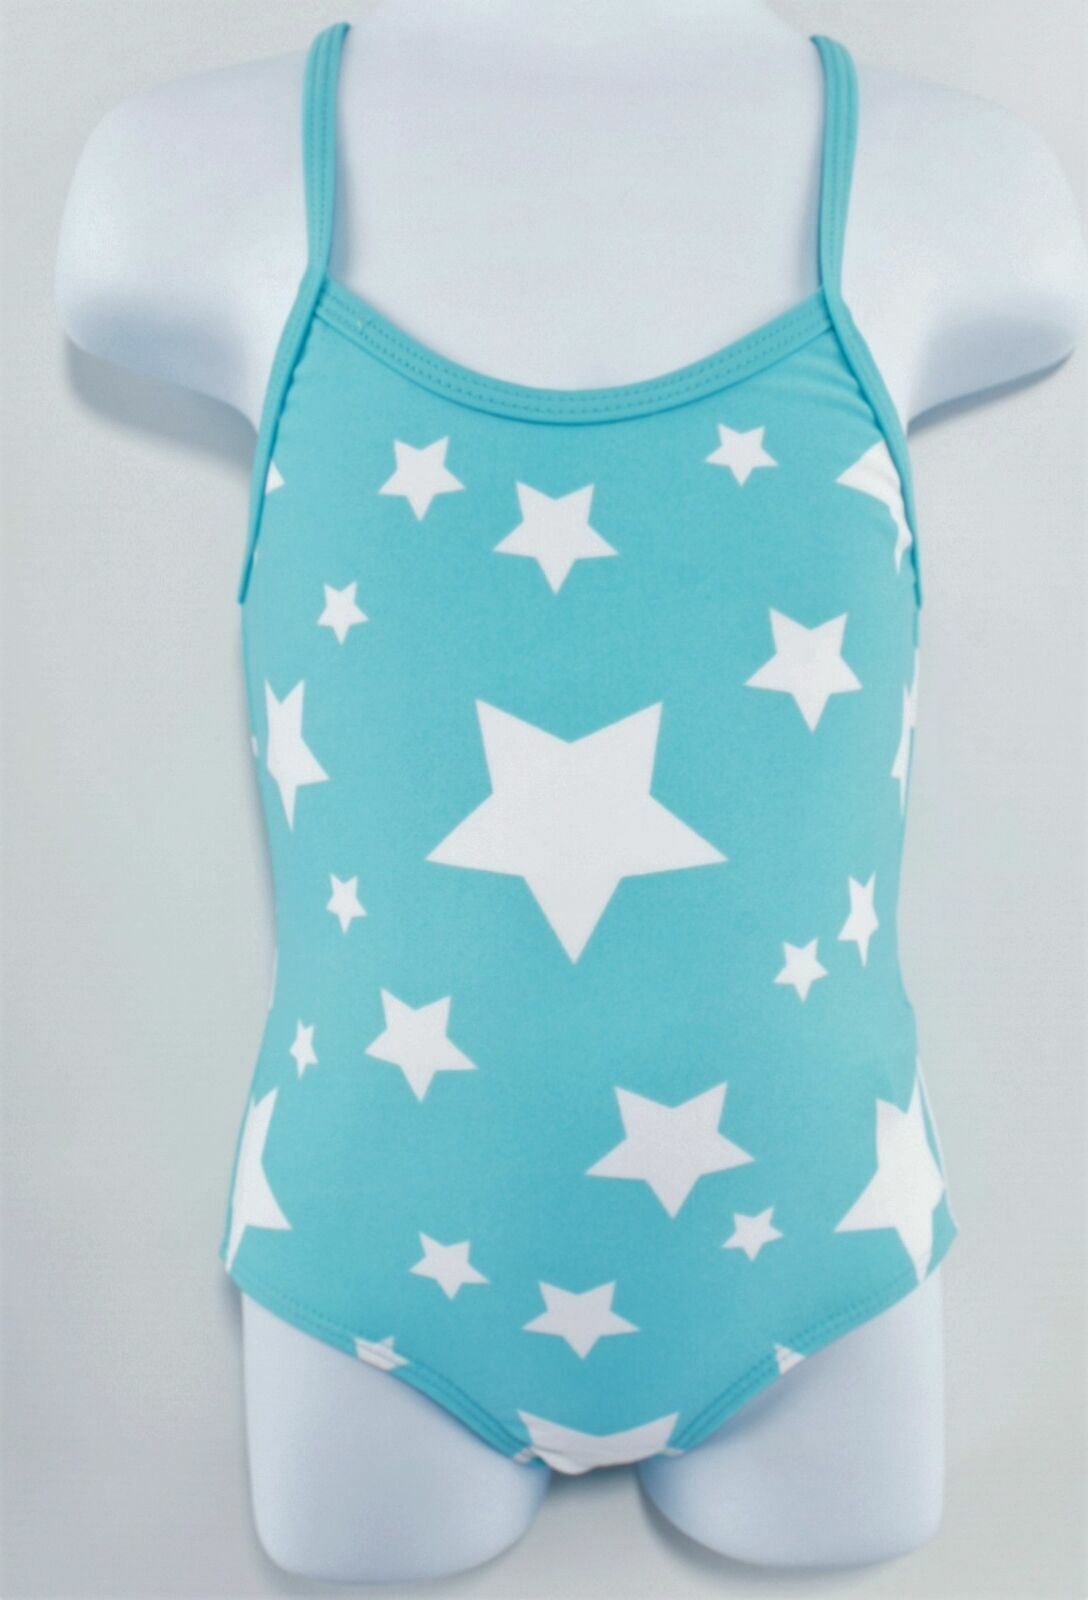 BELLYBUTTON Girls Blue with White Stars Swimsuit- Age 2 years to 3 years